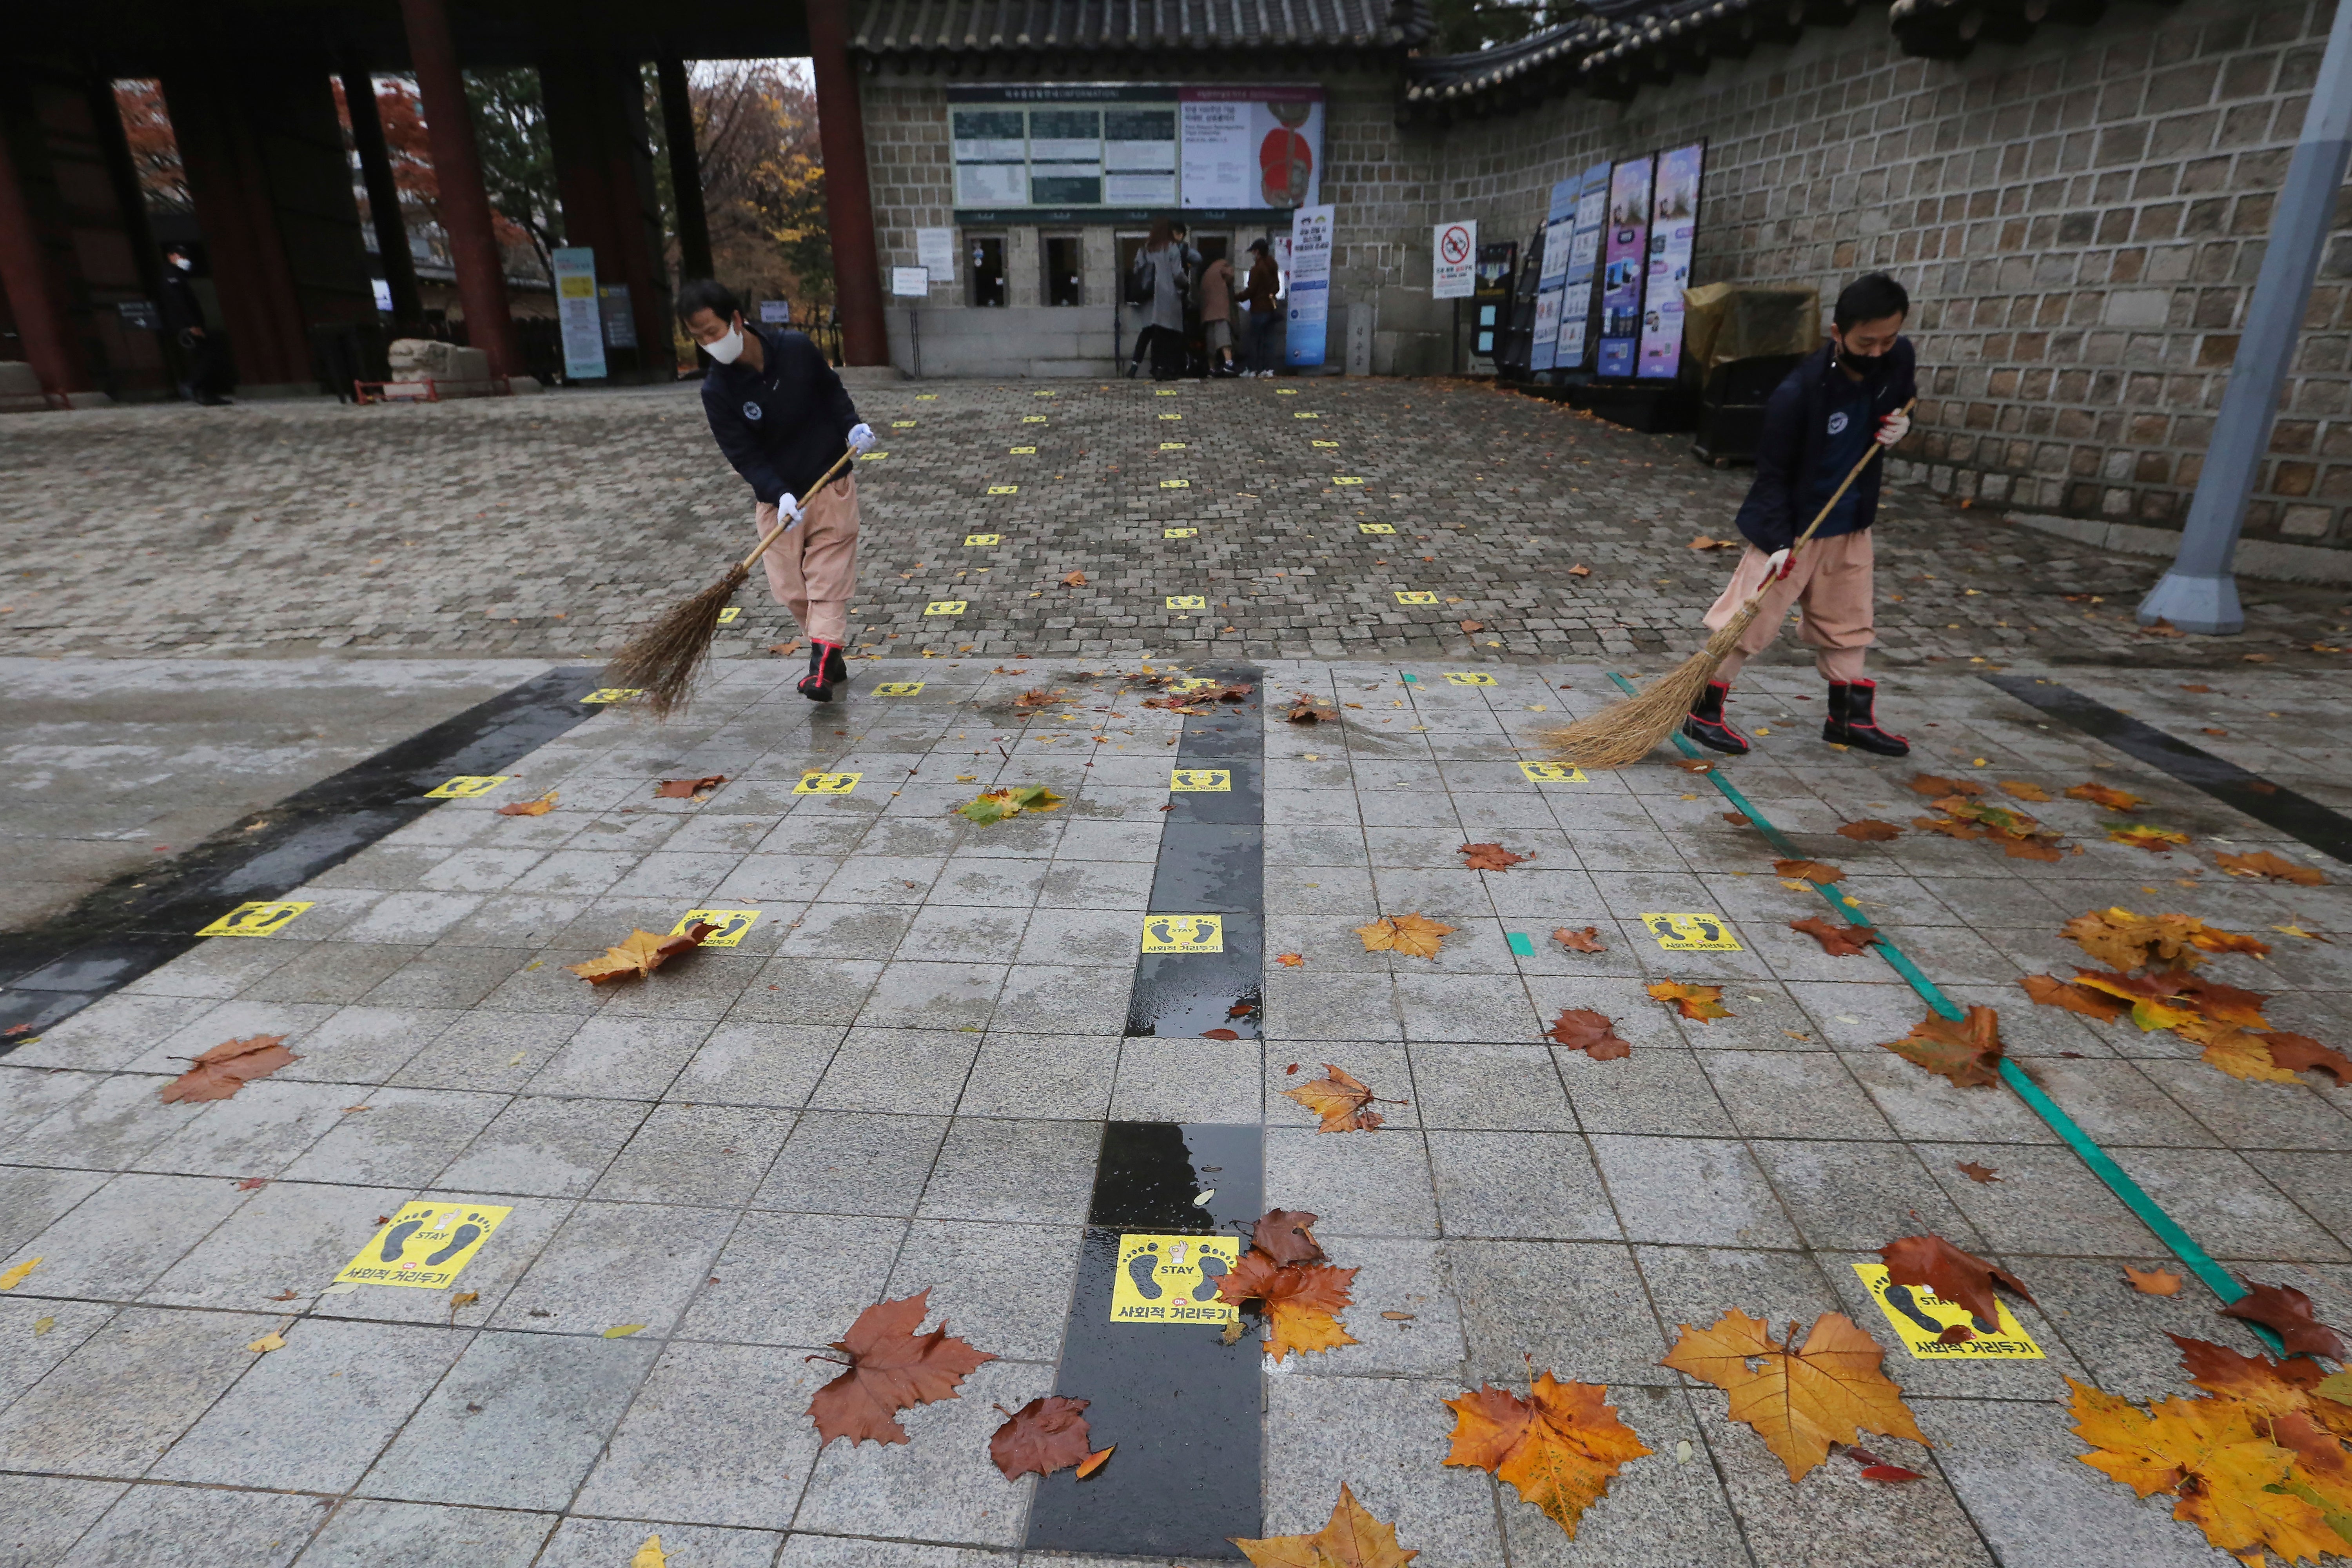 Social distancing signs are seen on the road as people clean fallen leaves in front of the Deoksu Palace in Seoul, South Korea